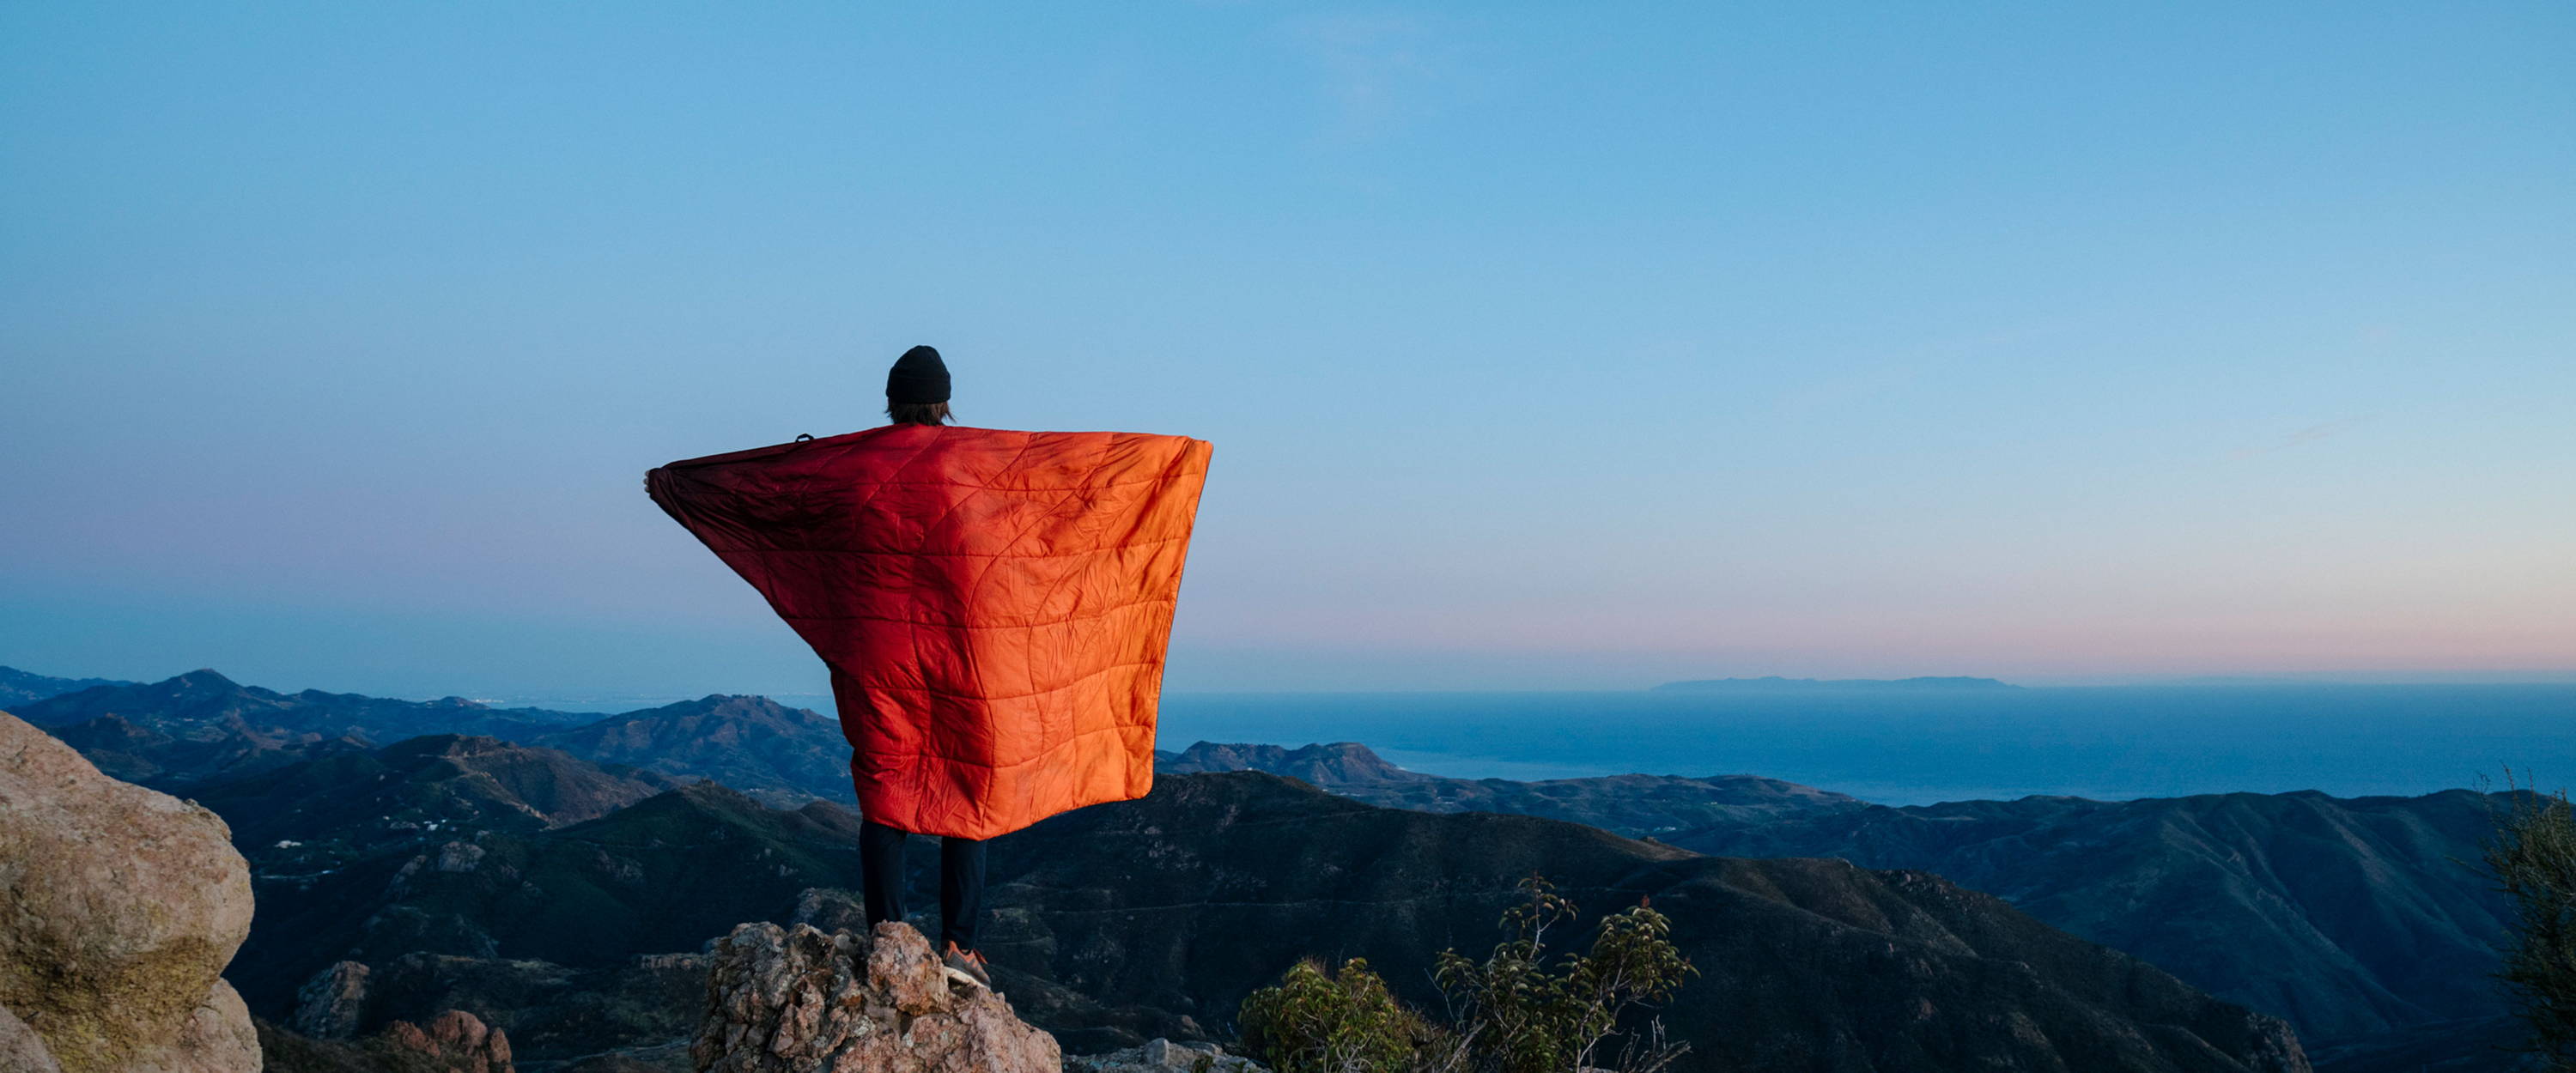 Man standing at vista over looking mountains in a Rumpl blanket